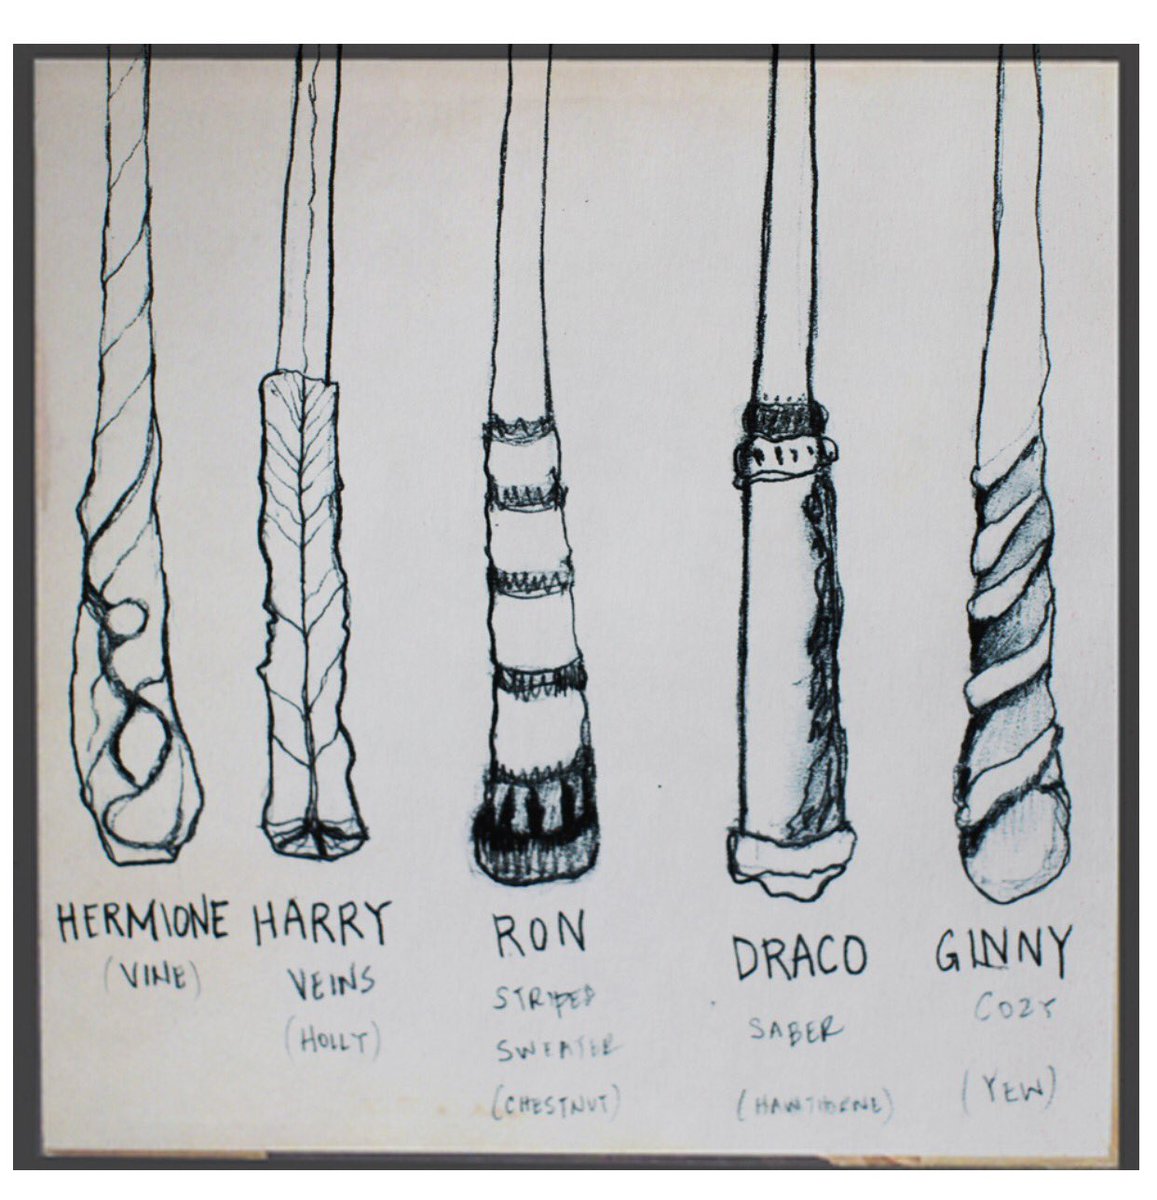 Evolution of wand designs in the Harry Potter universe